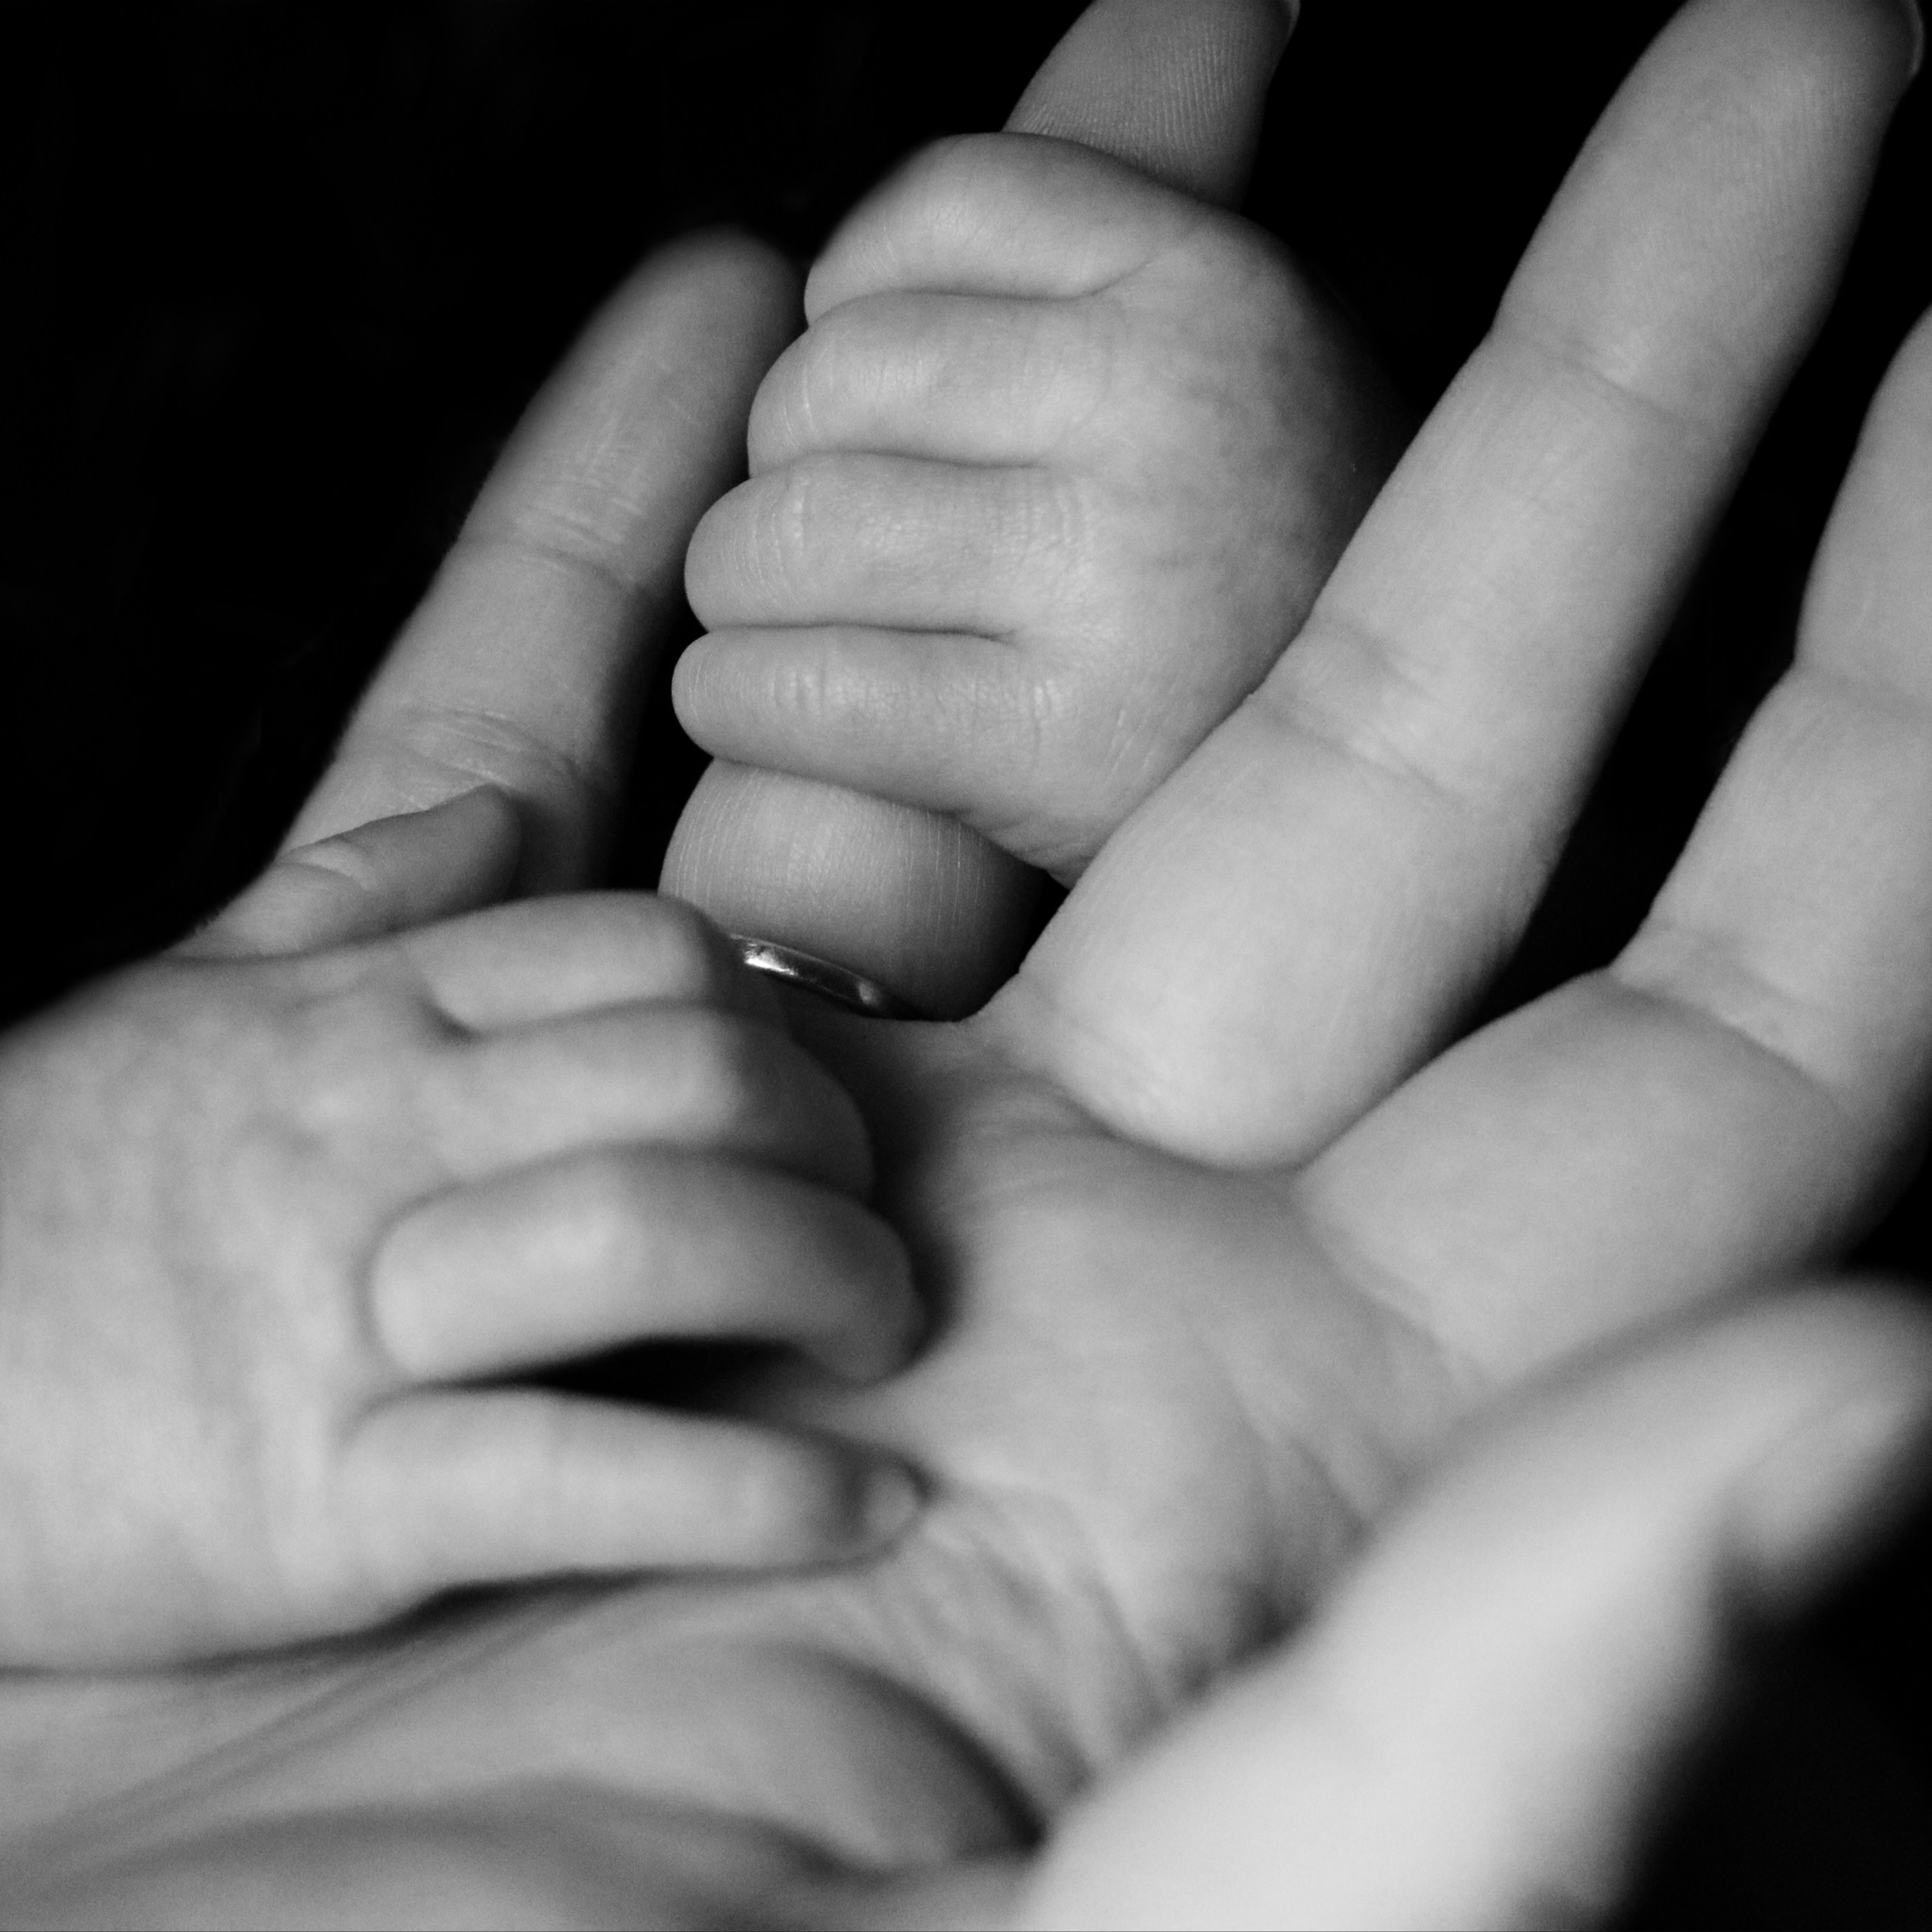 Baby hand holding fingers of adult hand. Photo by Liv Bruce on Unsplash